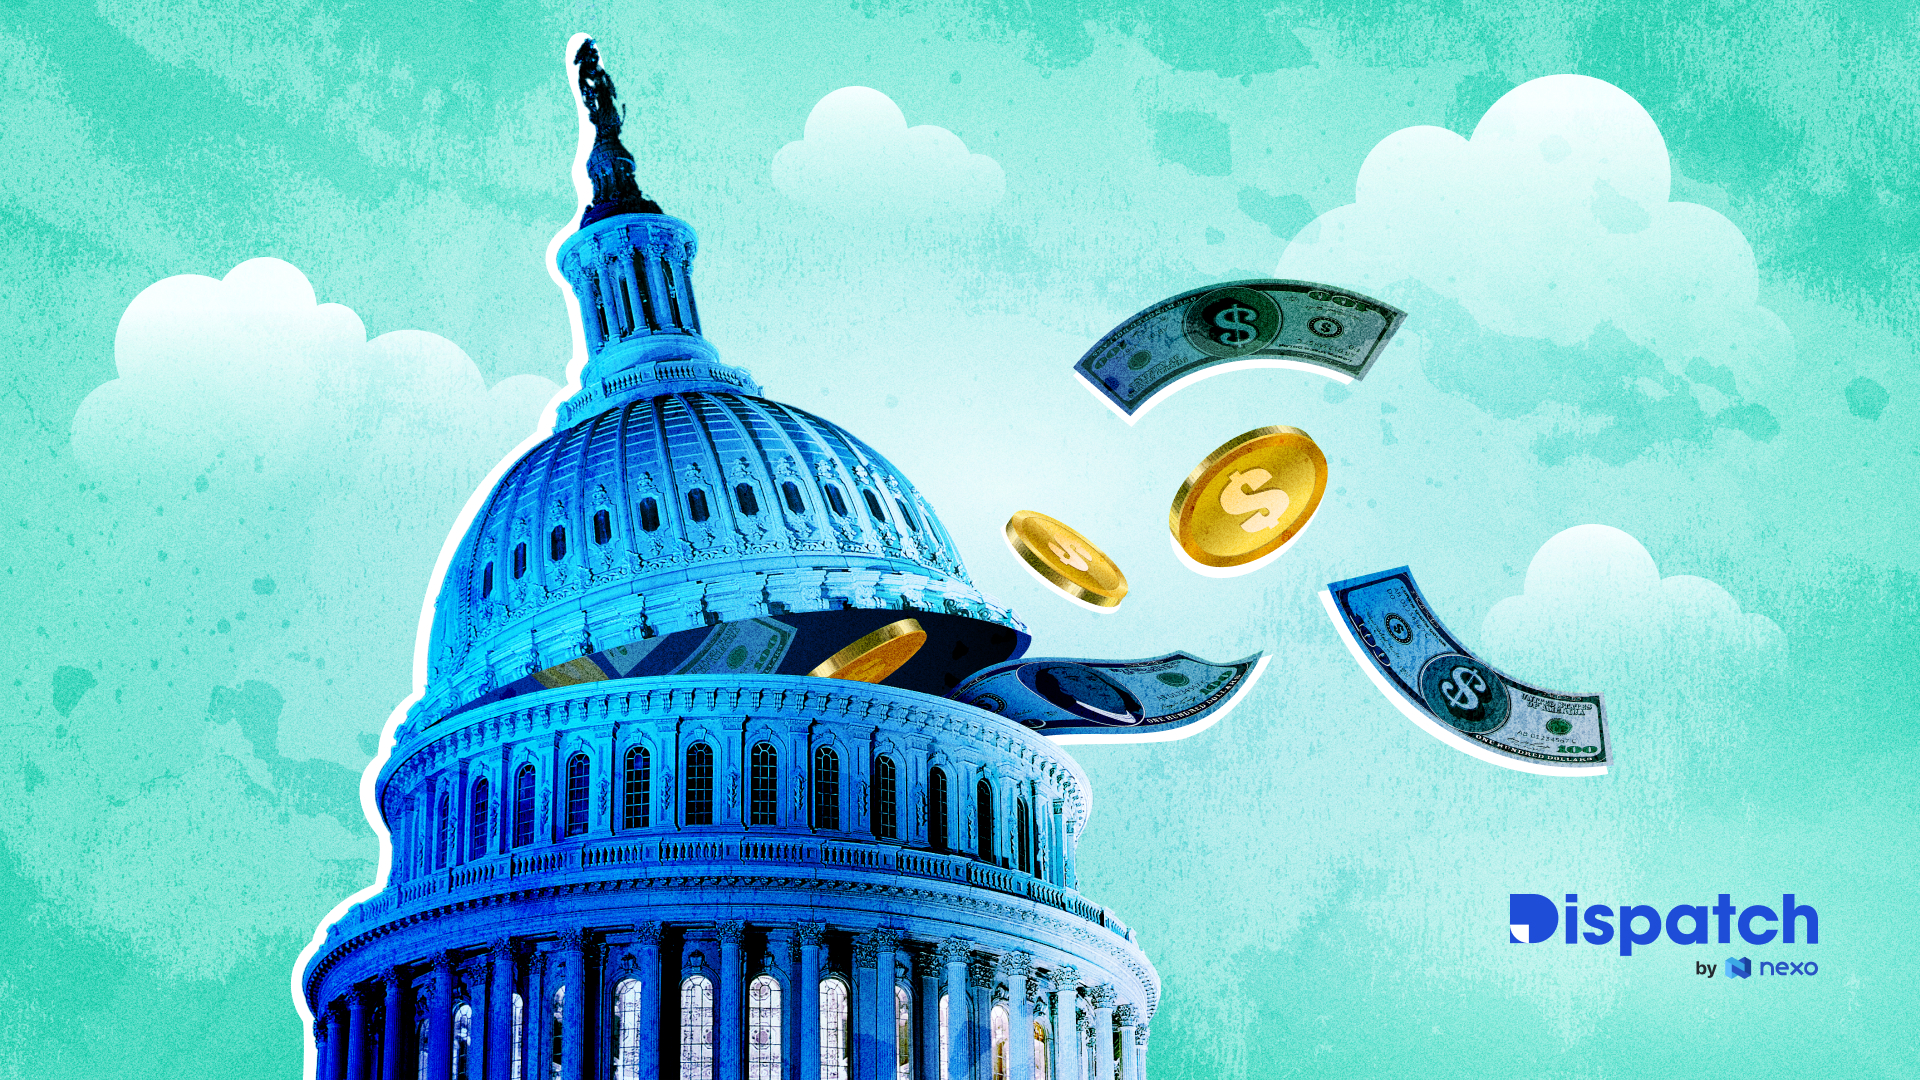 Dispatch #142: A Debt Ceiling Deal, but Is the Damage Already Done?